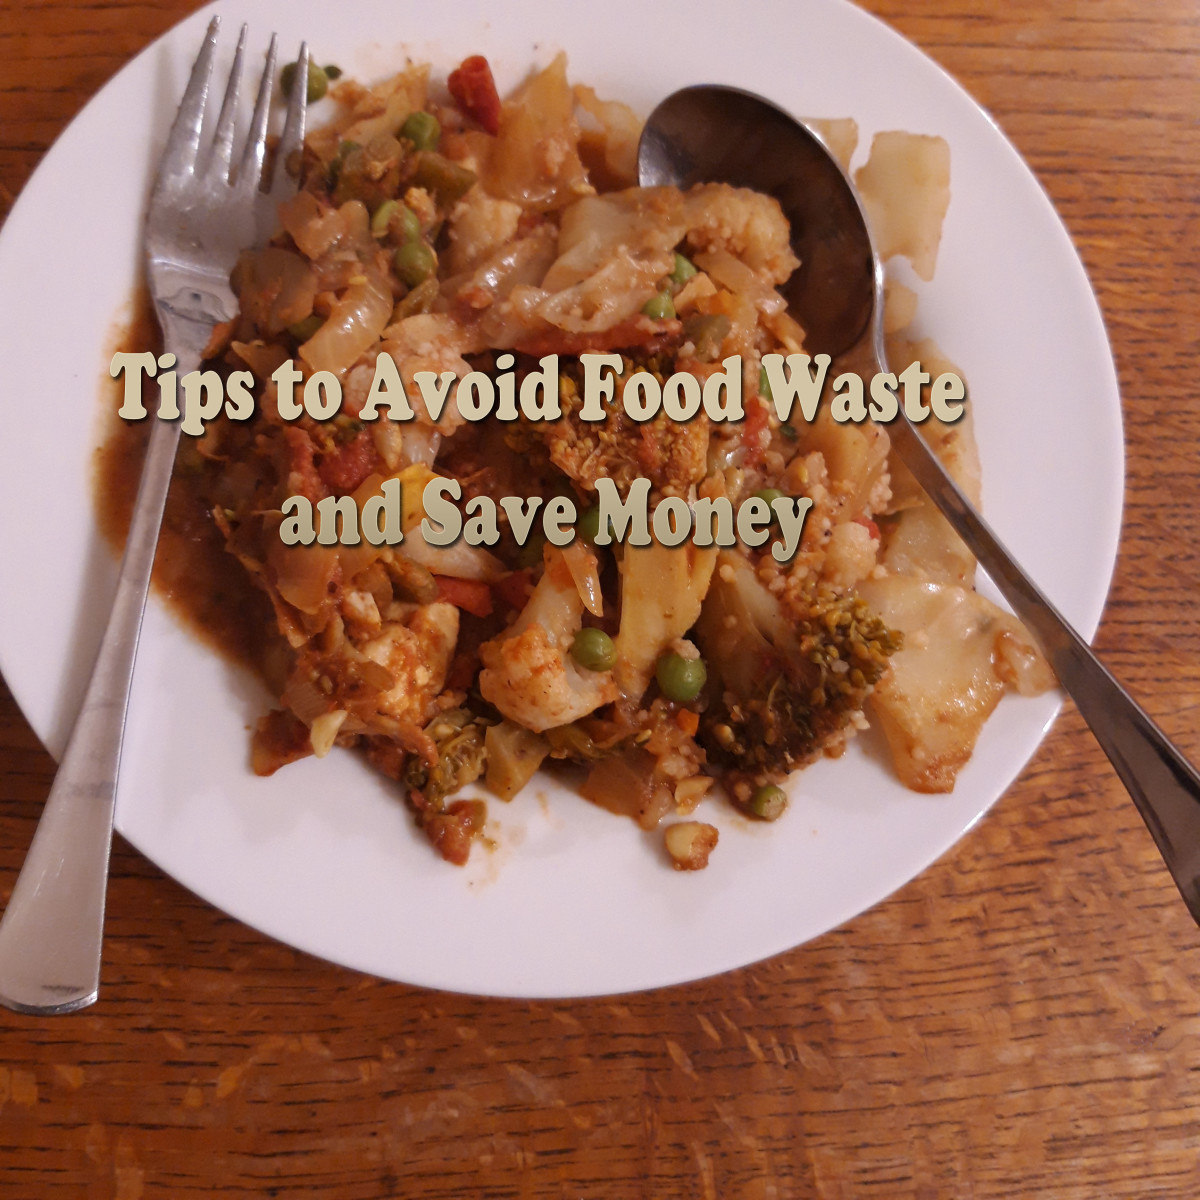 8 Tips to Avoid Food Waste and Save Money